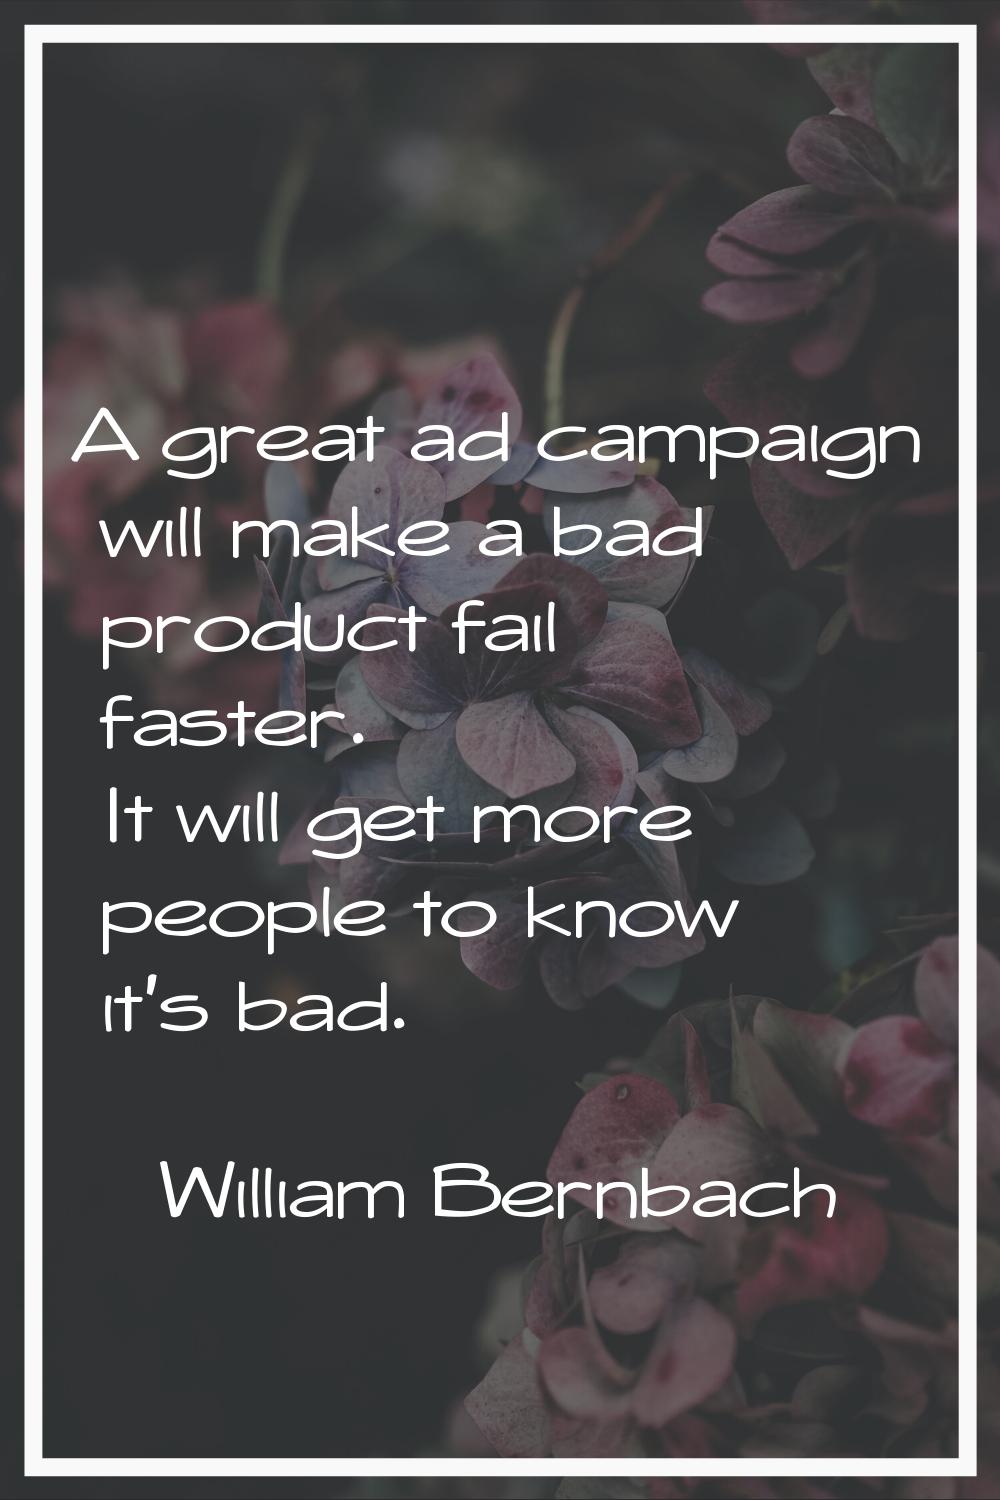 A great ad campaign will make a bad product fail faster. It will get more people to know it's bad.